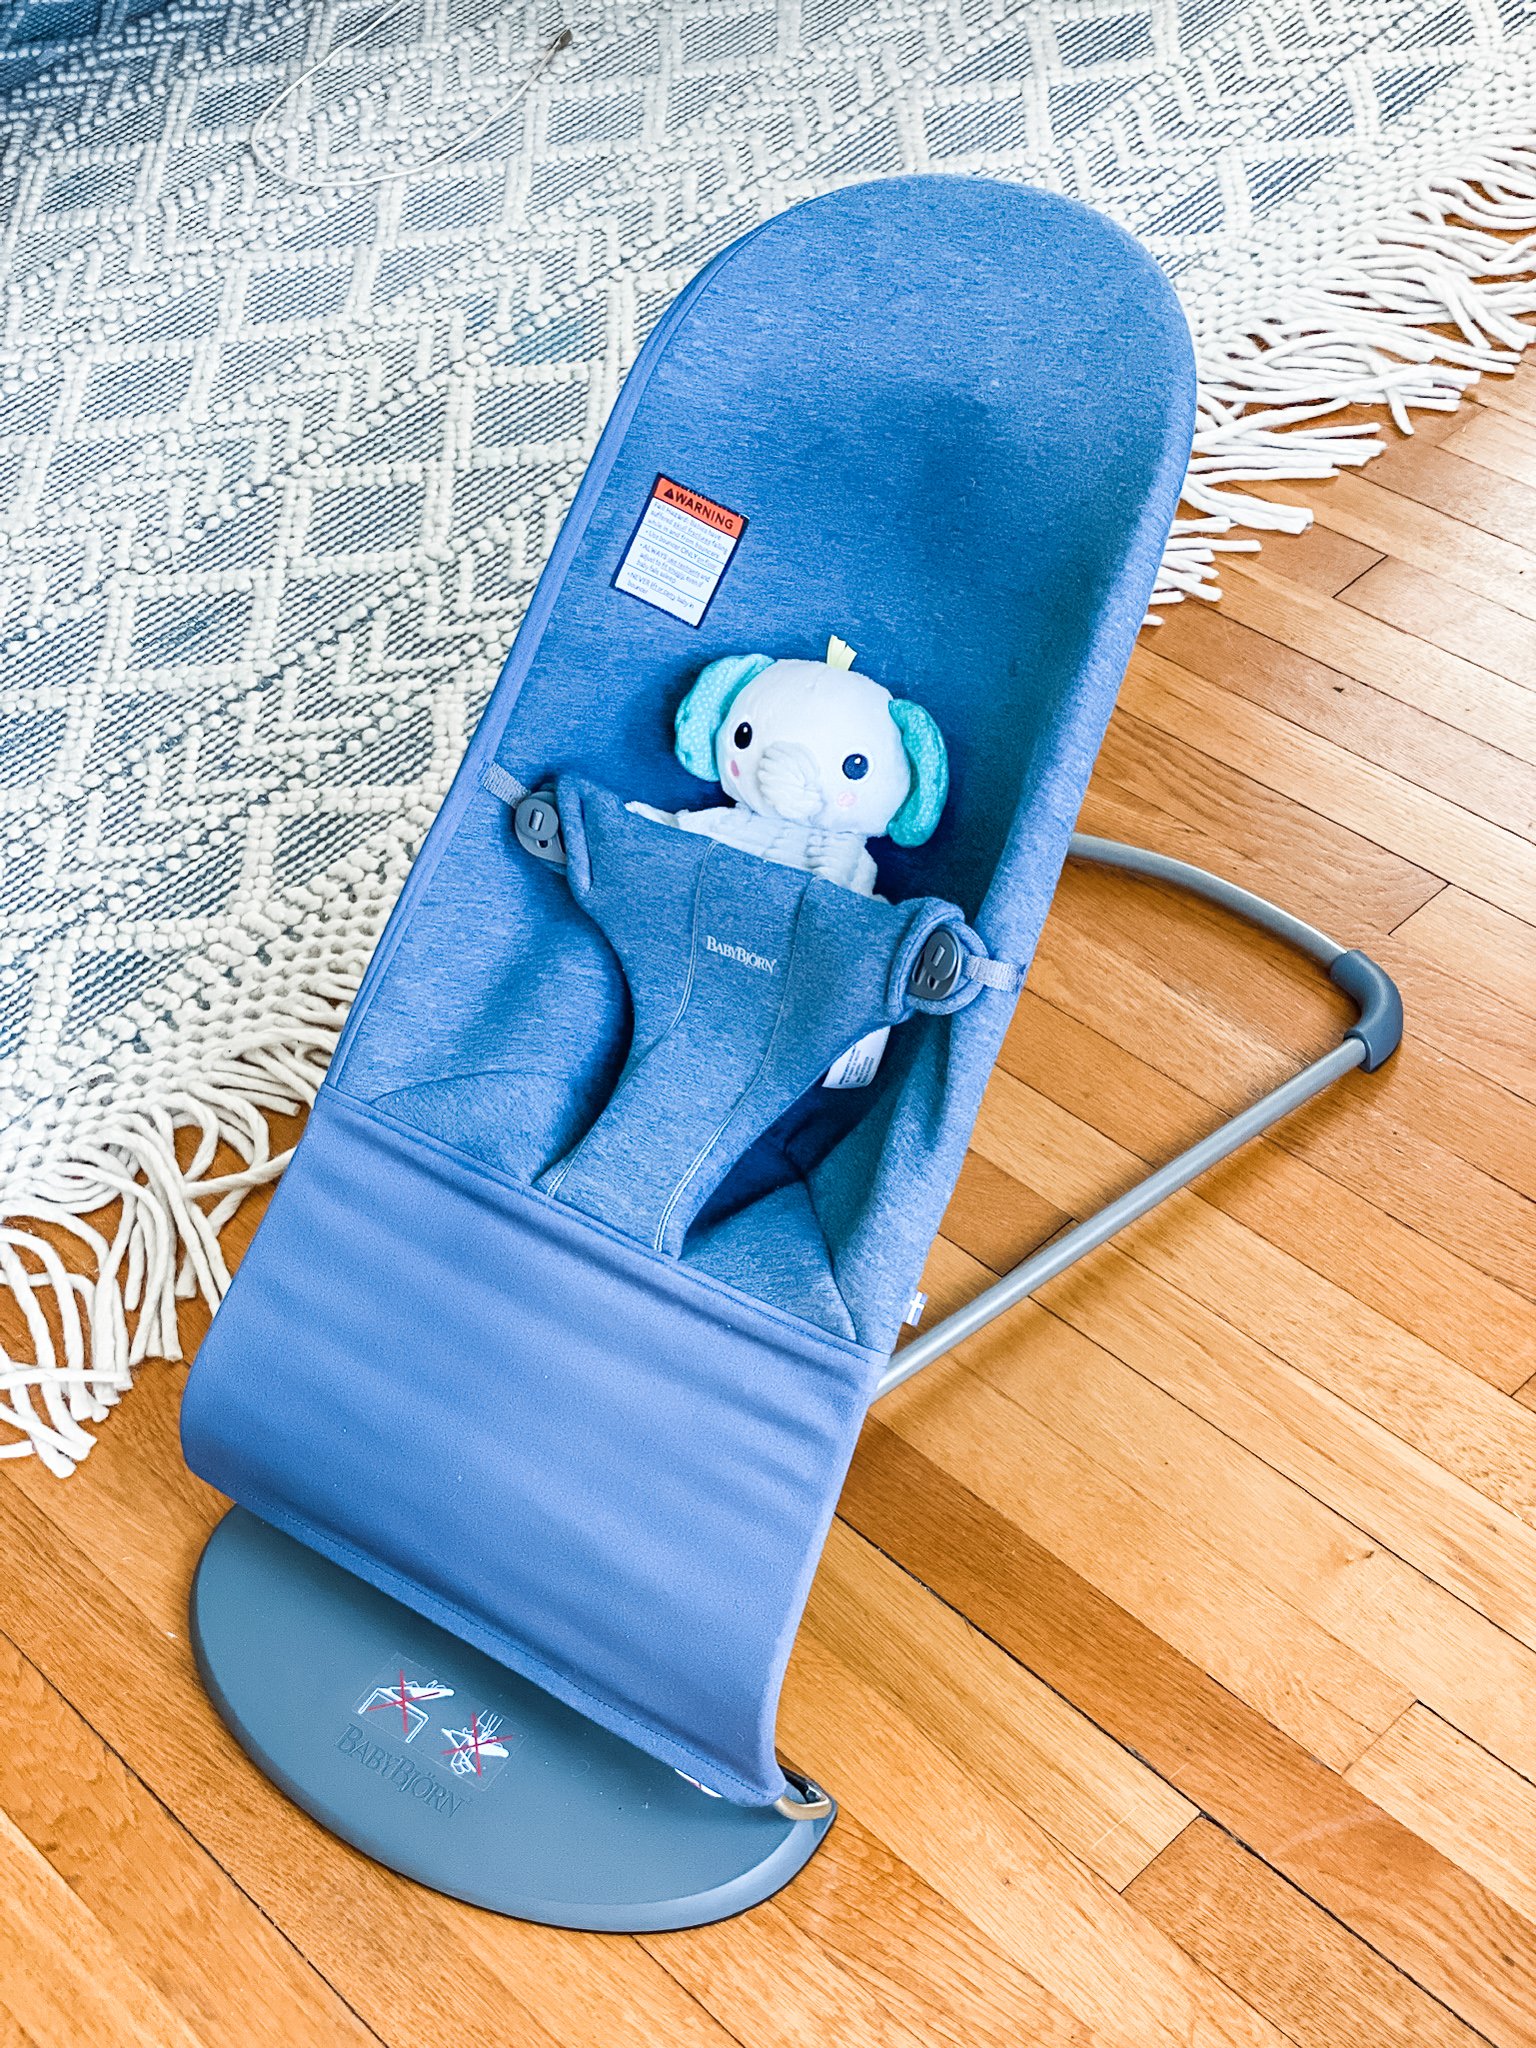 BabyBjorn Bouncer | What Thomas Loved from 0-6 Months